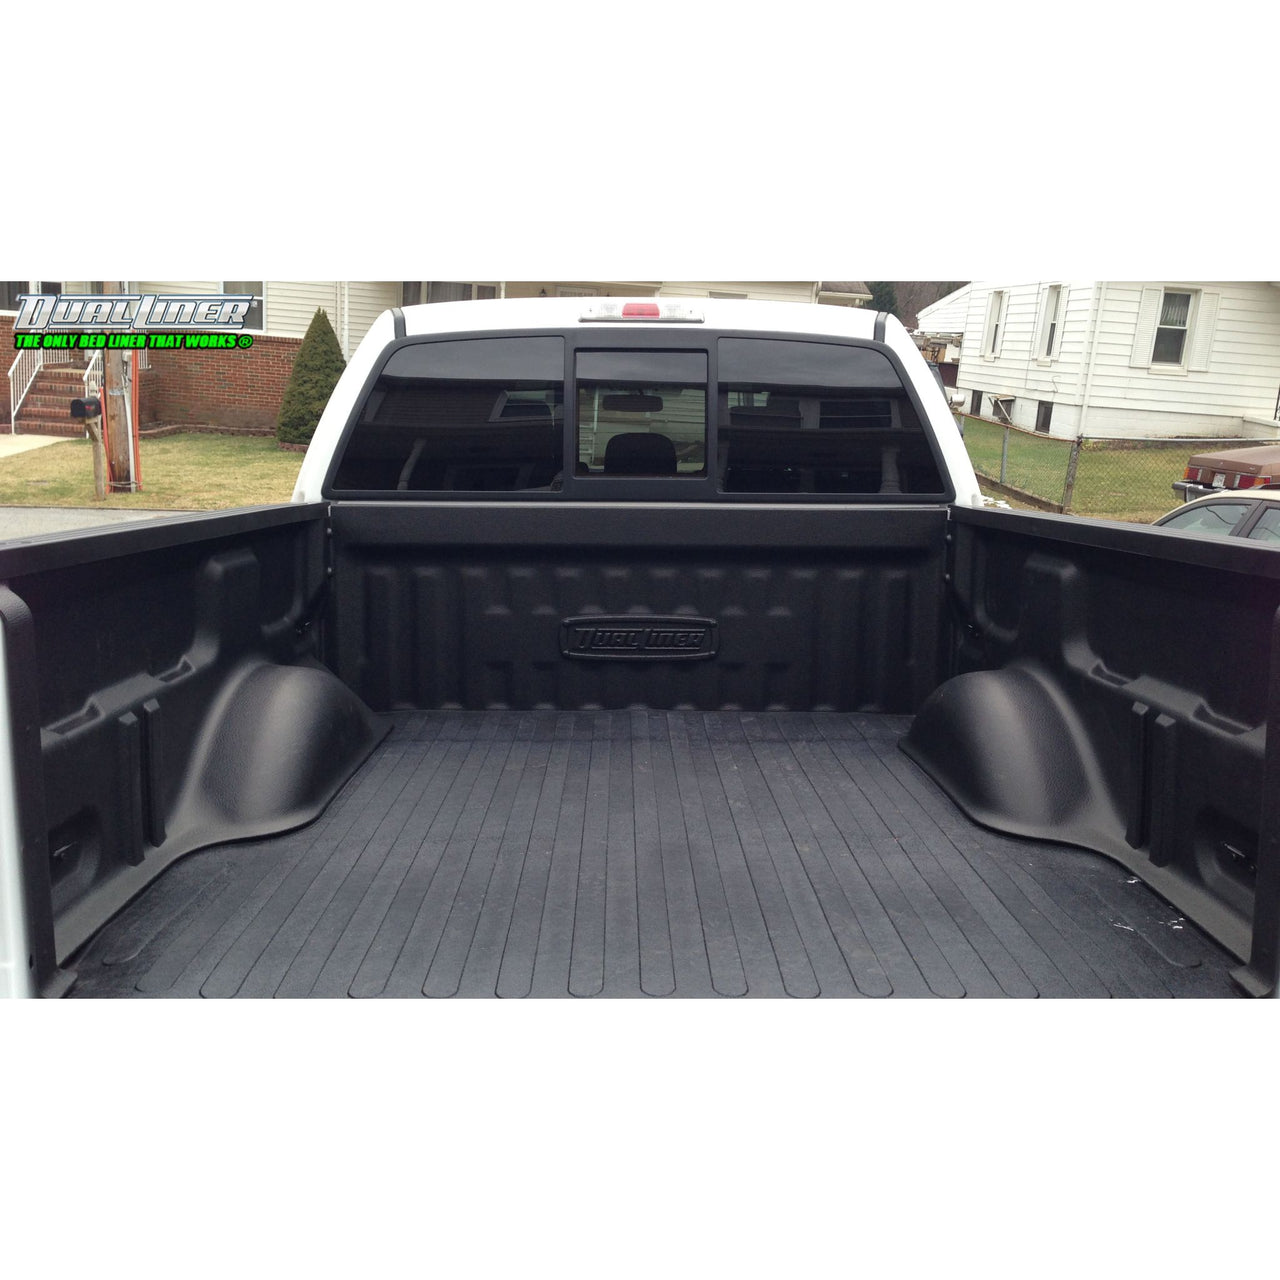 DualLiner 2008 to 2010 F-250 /F-350 - Long 8' Bed